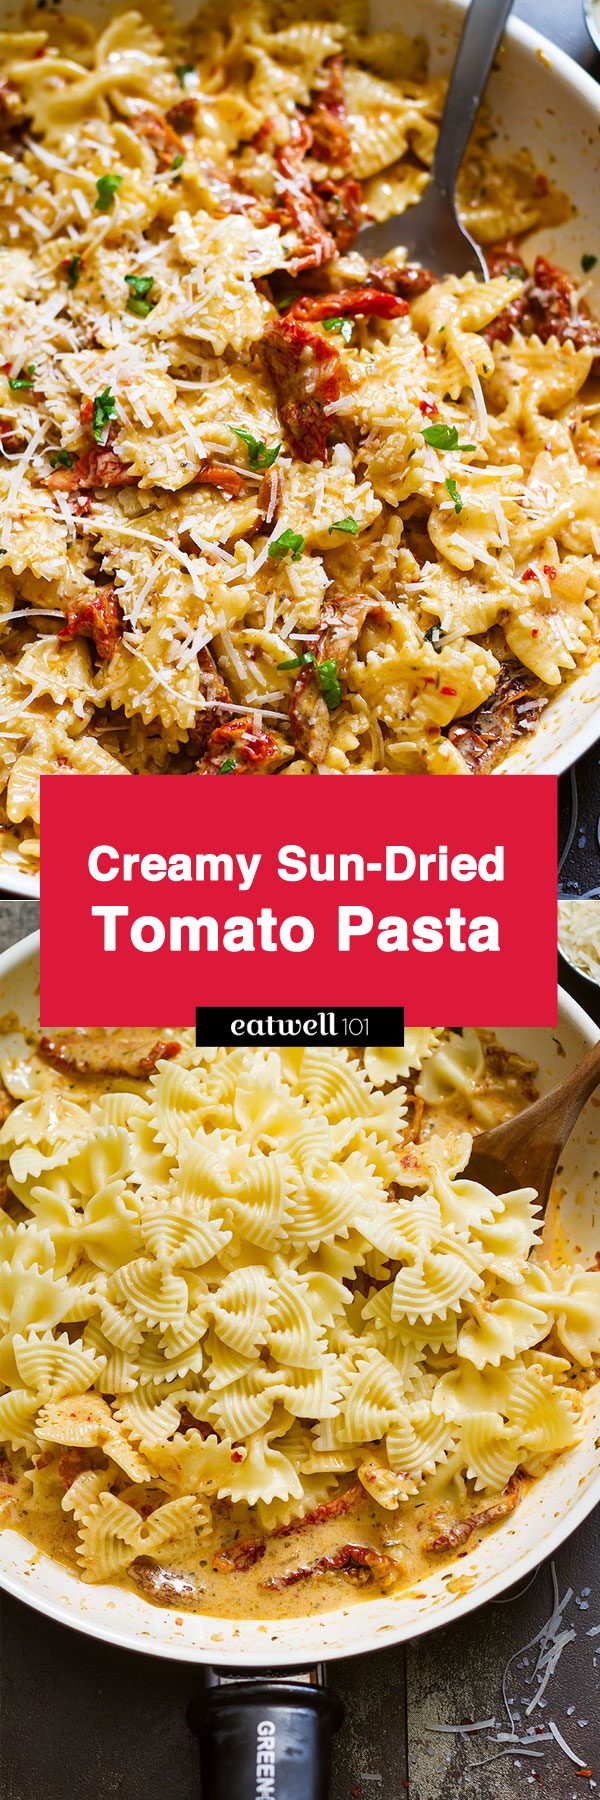 Creamy Sun-Dried Tomato Pasta - #pasta #recipe #eatwell101 - This creamy sun-dried tomato pasta will leave you feeling satisfied and happy with its hearty flavors.